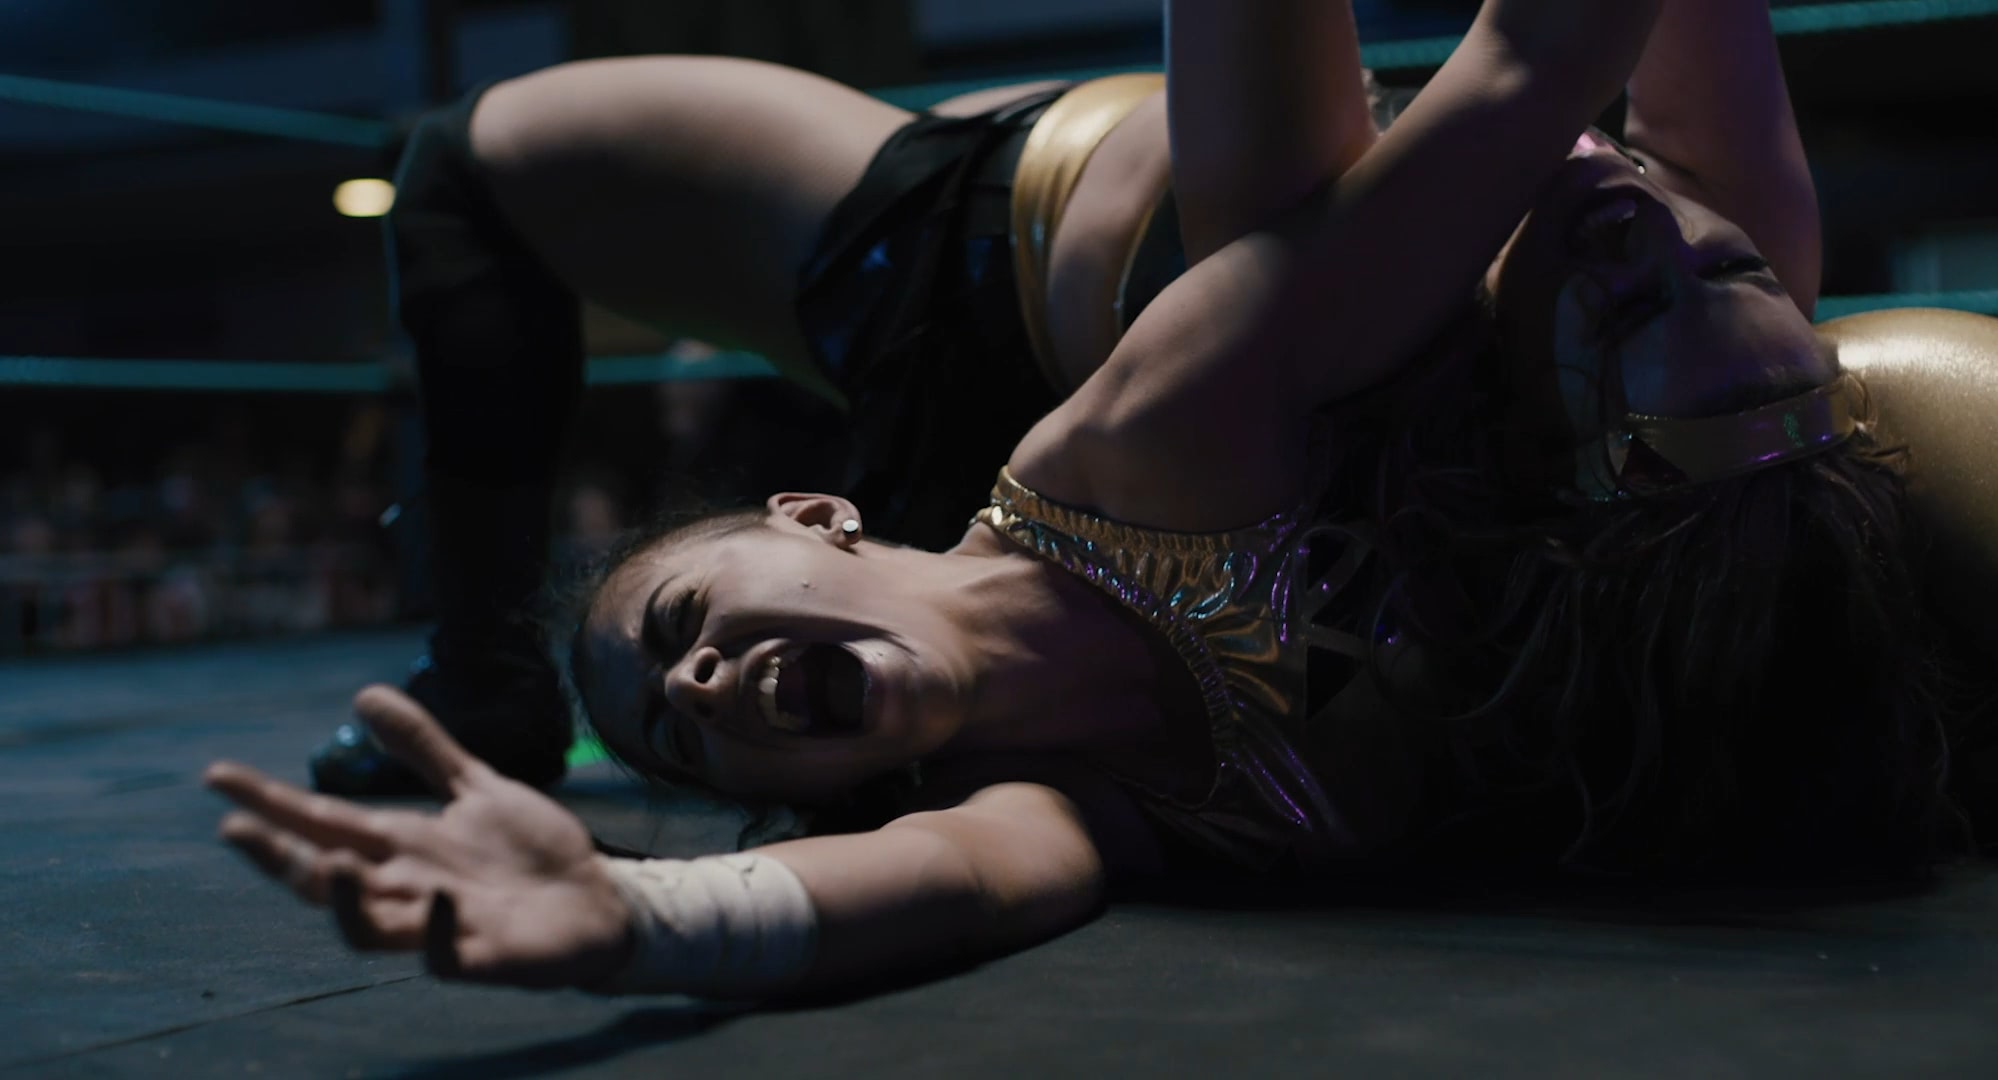 A young woman lying on the floor of the ring, screaming in pain, while another woman is on top of her.